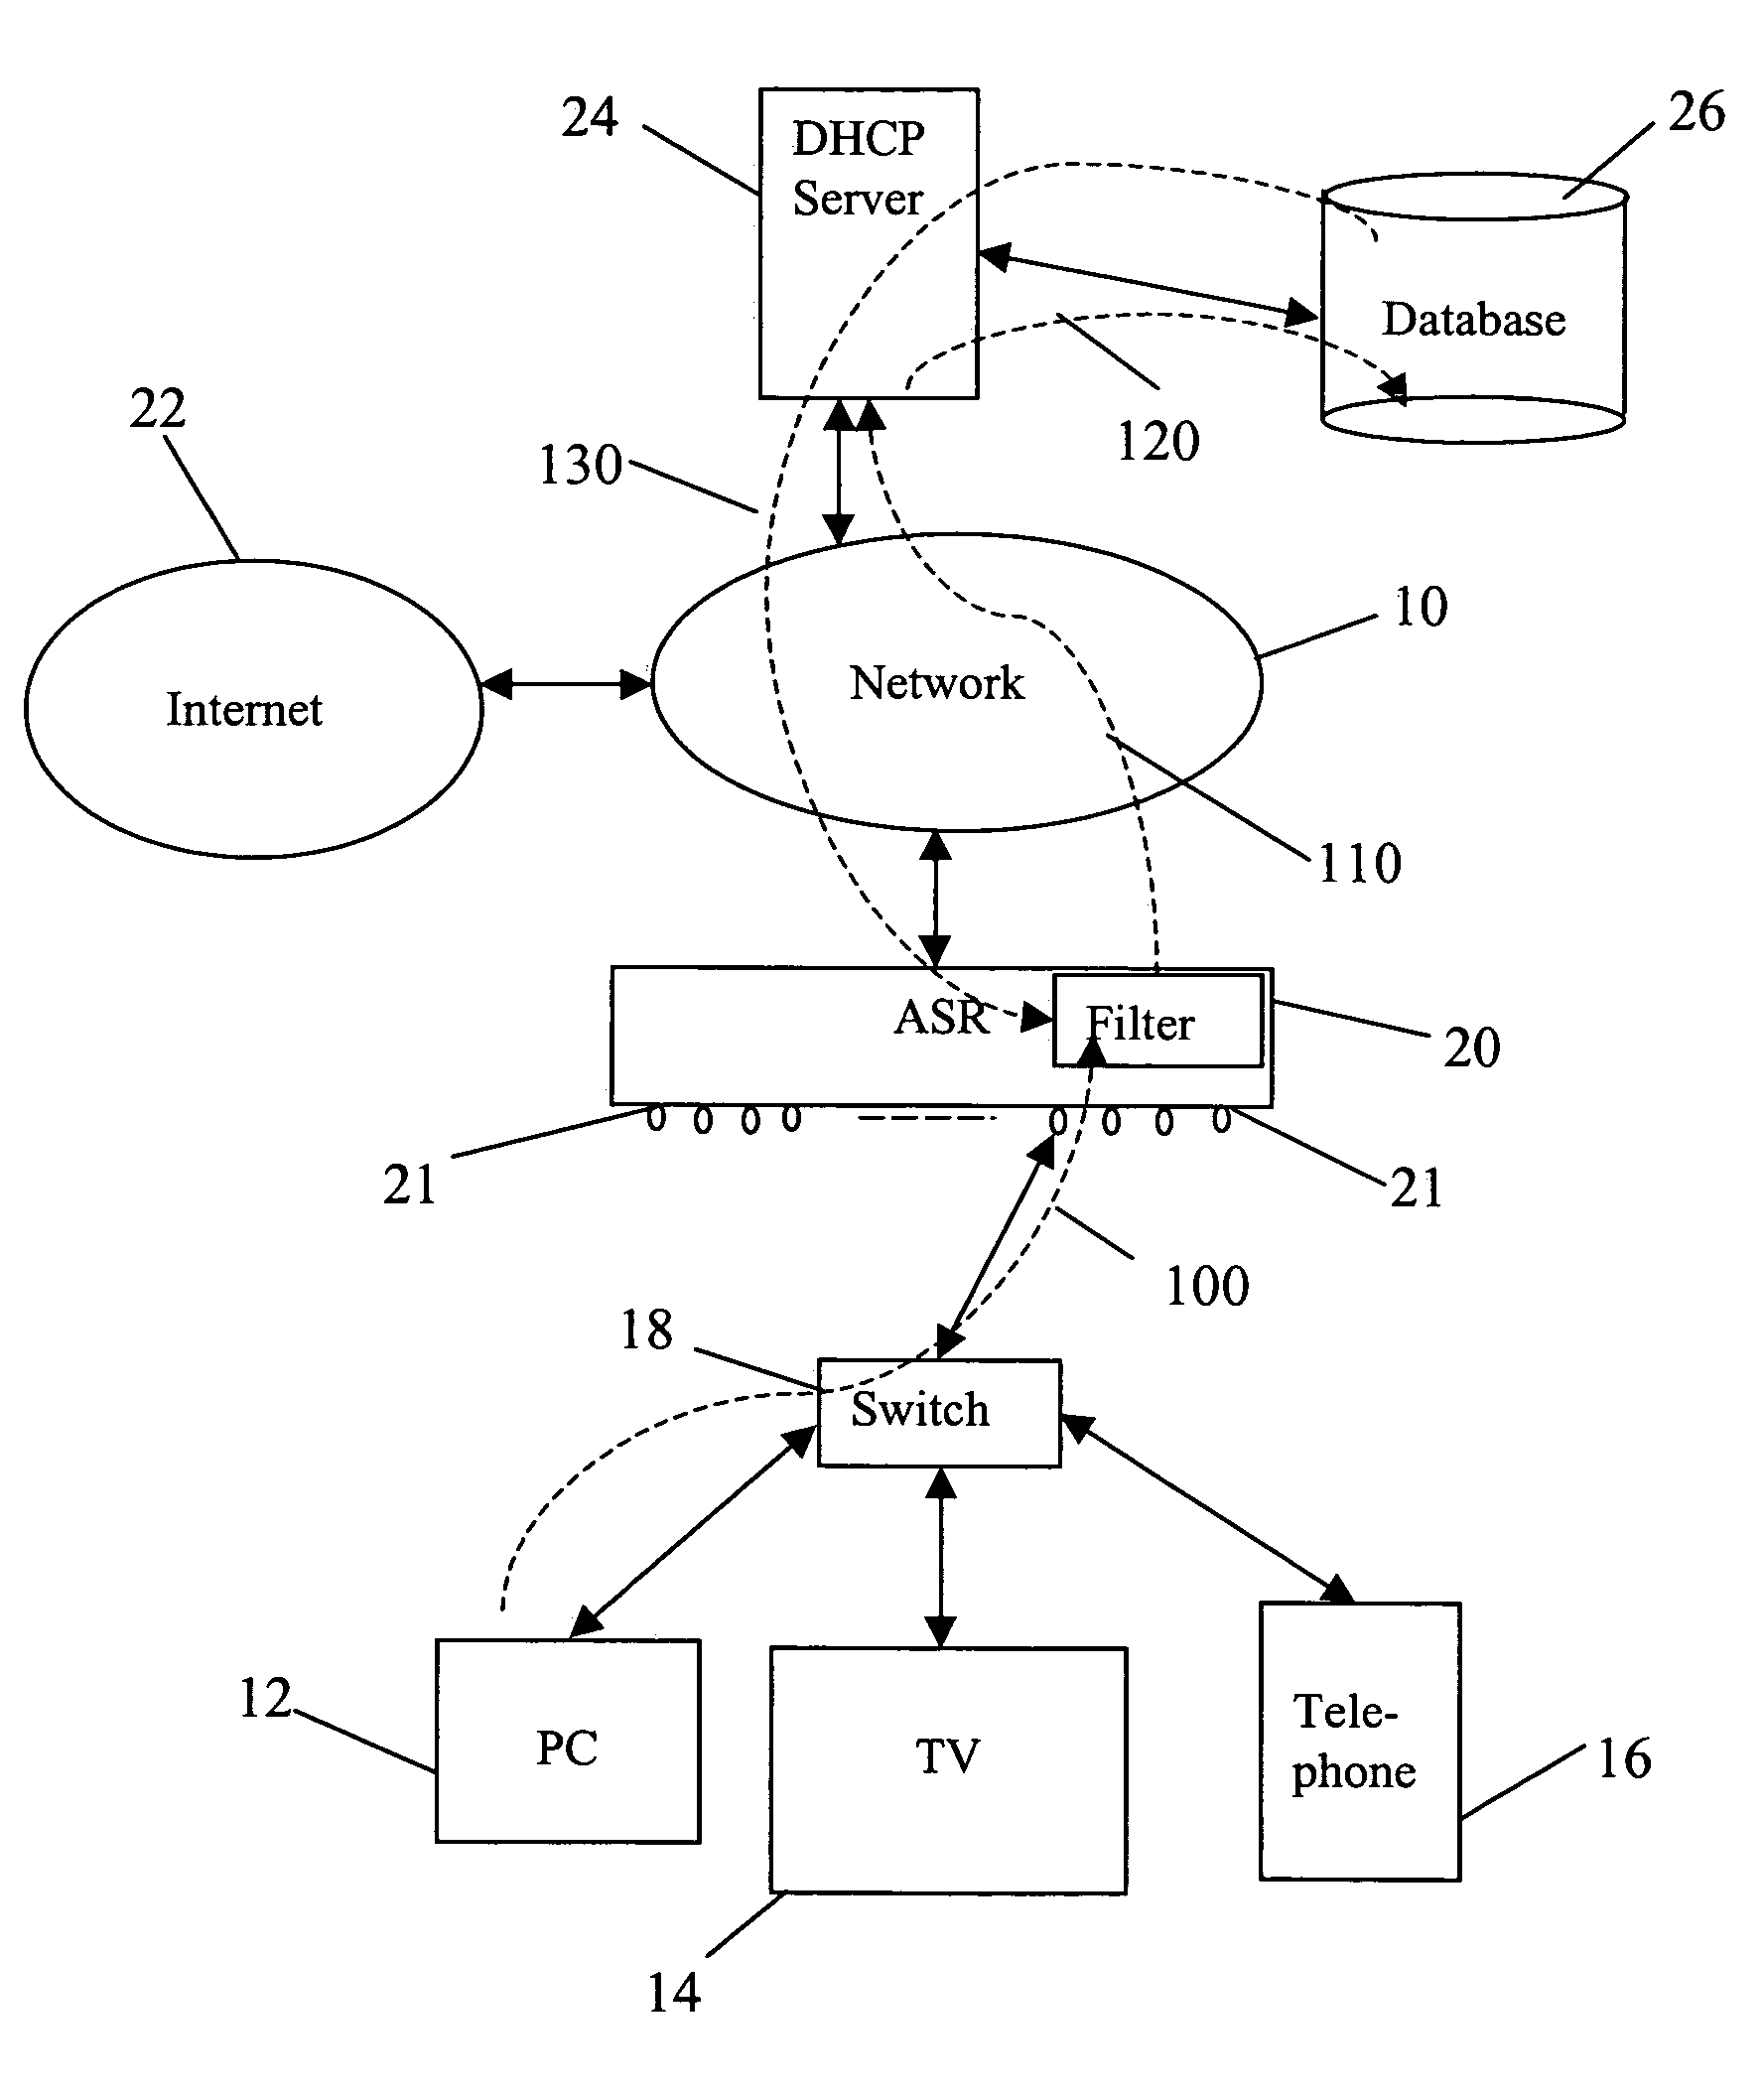 Dynamic port configuration of network equipment